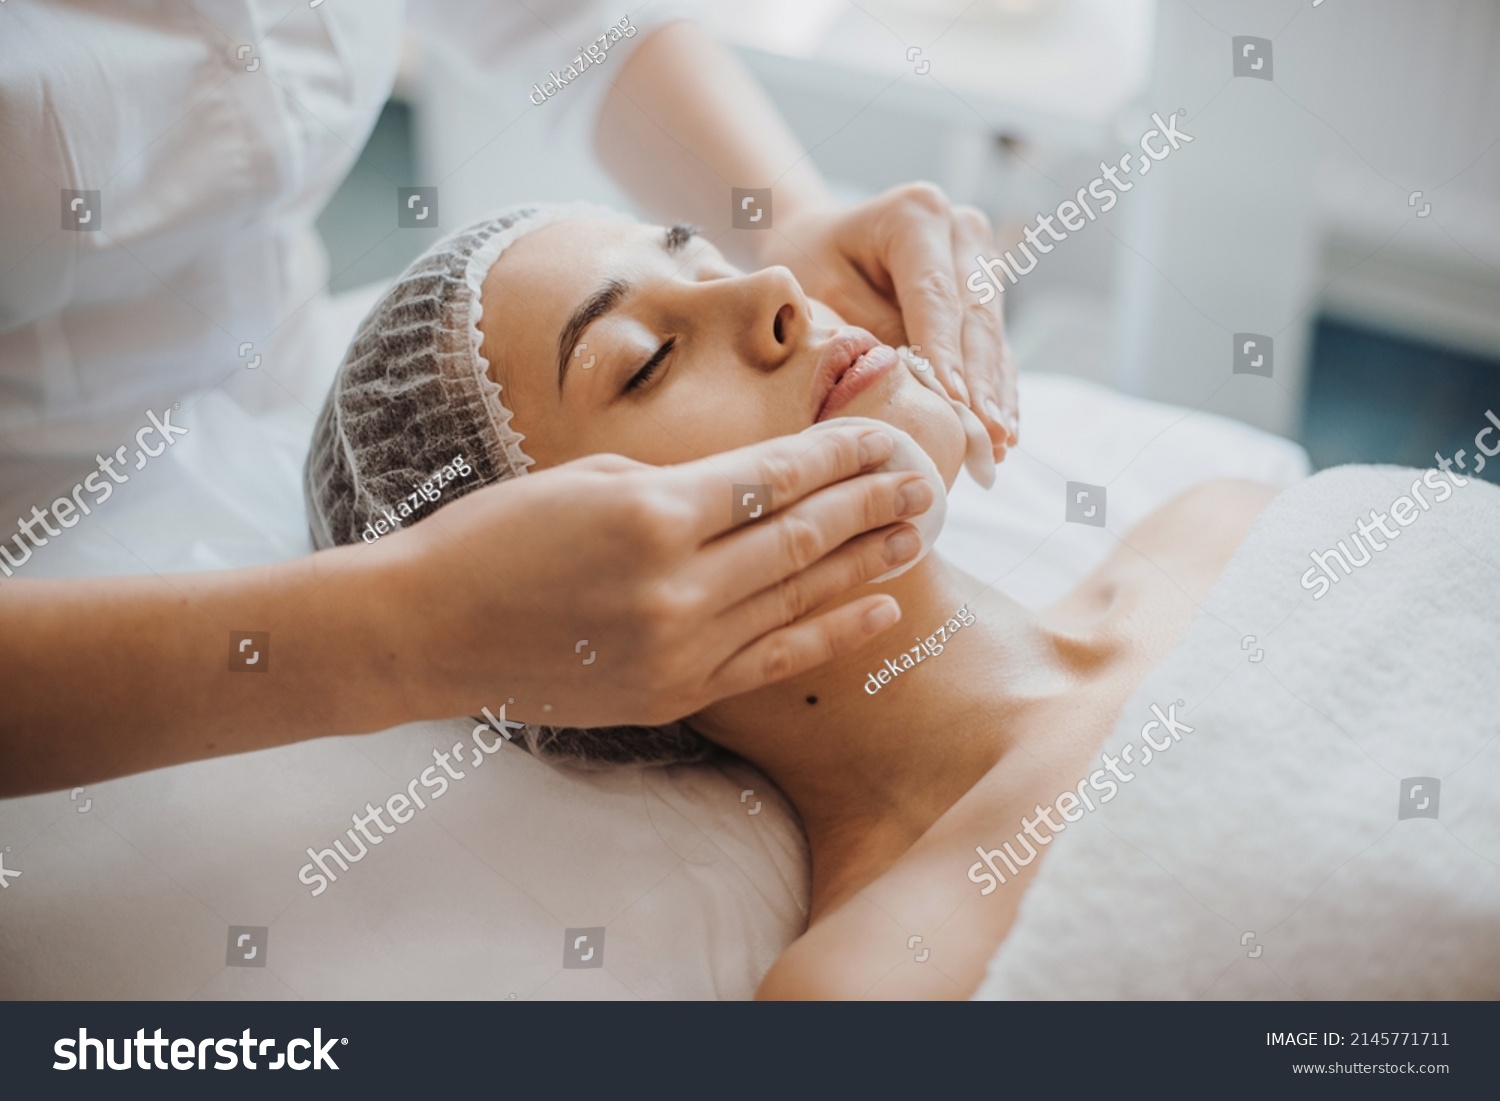 Facial skin treatment. Girl facial treatment. Facial skincare. Spa body care.Close up portrait of beautician's hands cleaning female face with cotton pads at #2145771711